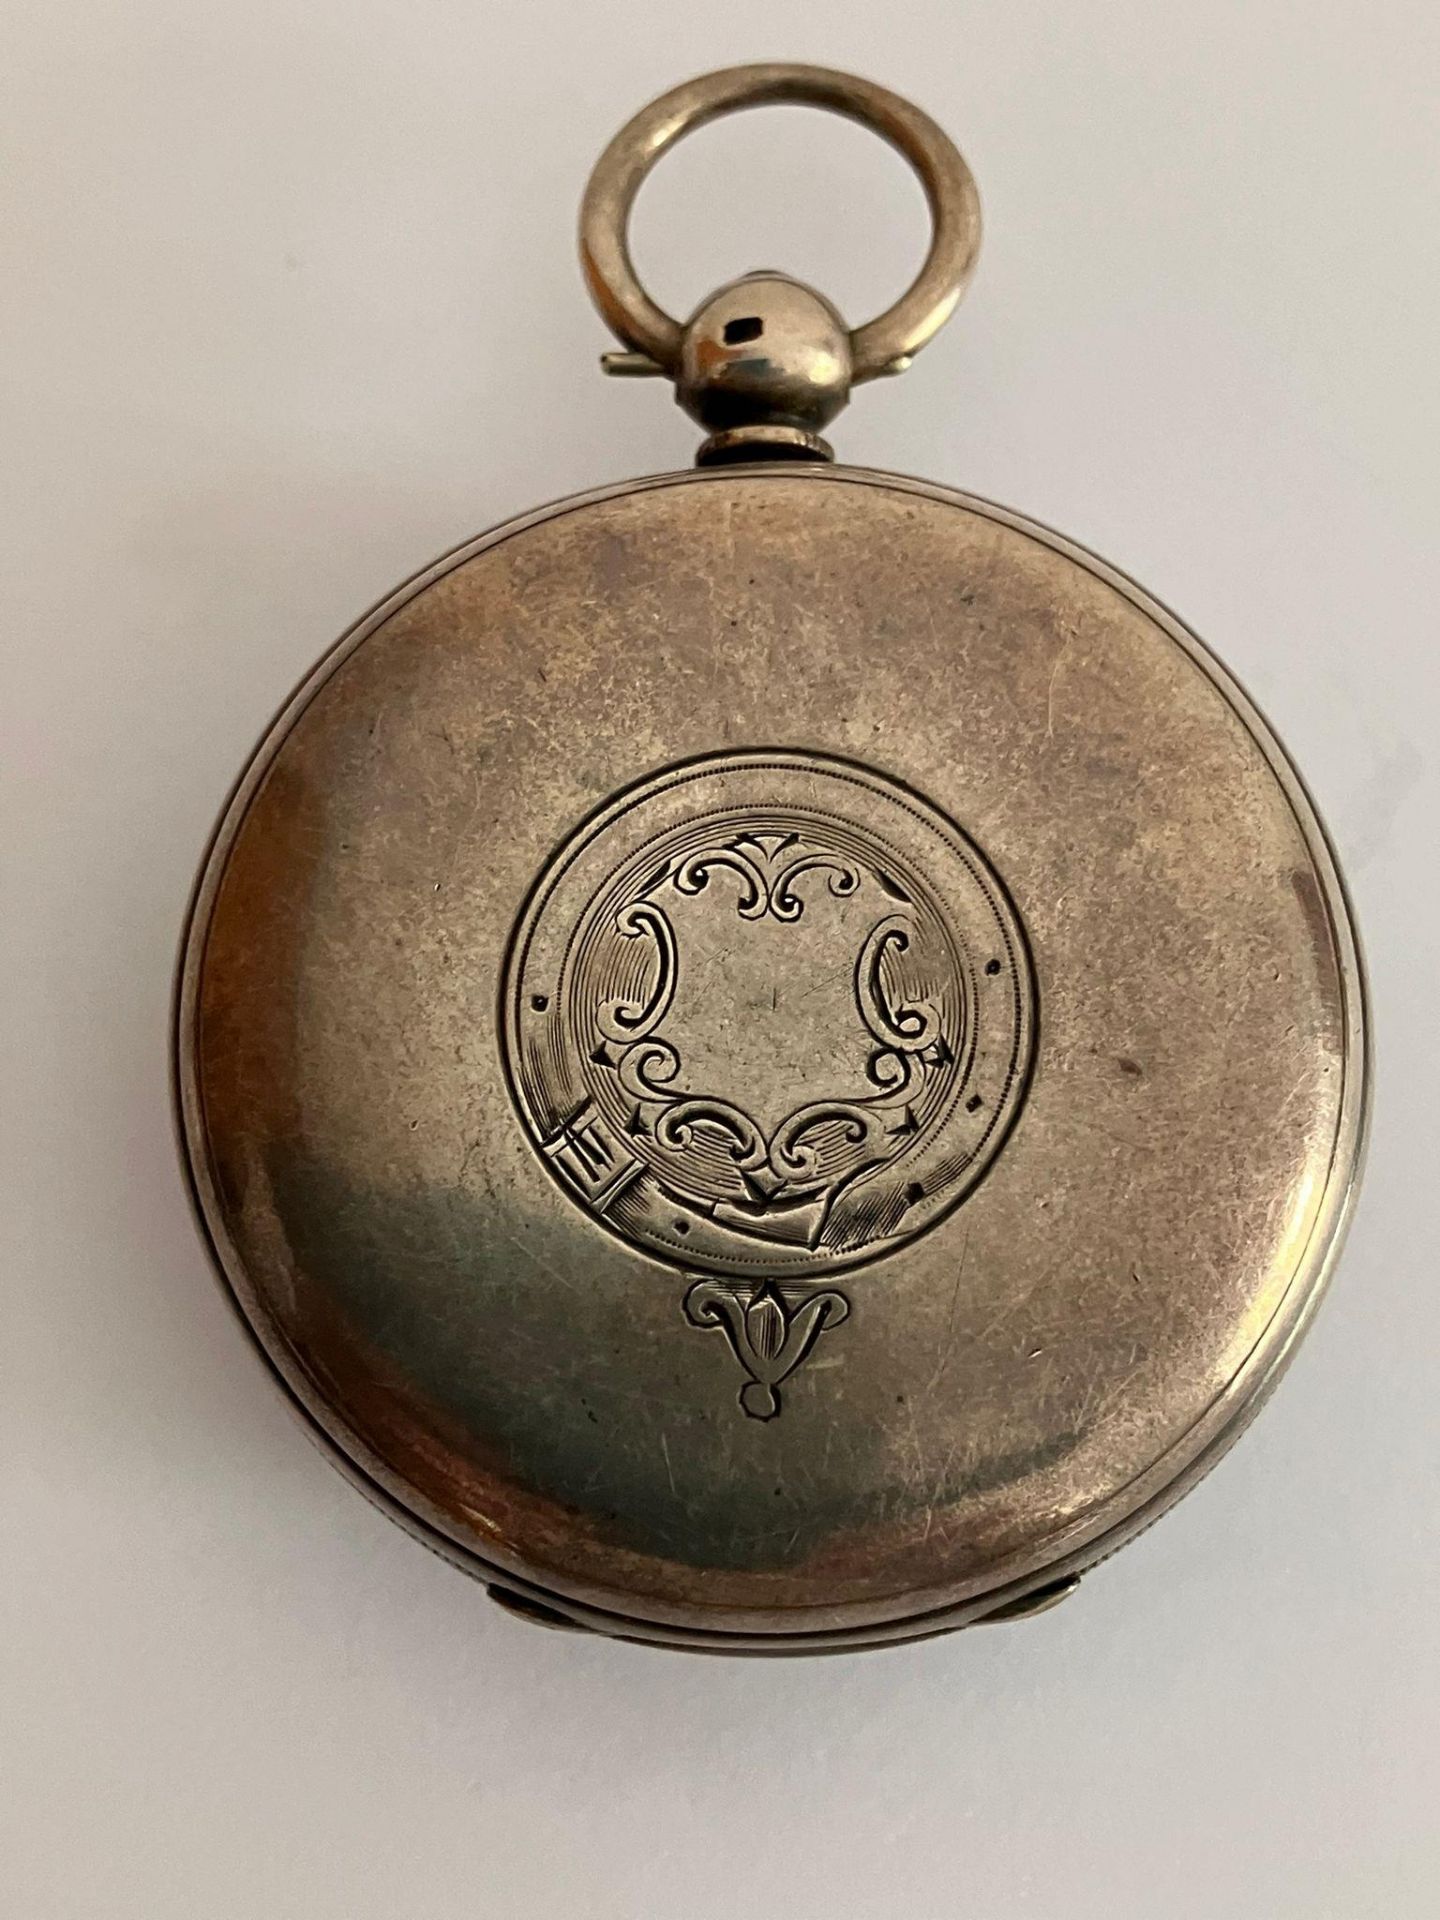 Antique SILVER POCKET WATCH with Silver Case hallmarked Robert John Pike, London 1873. Watch - Image 8 of 10